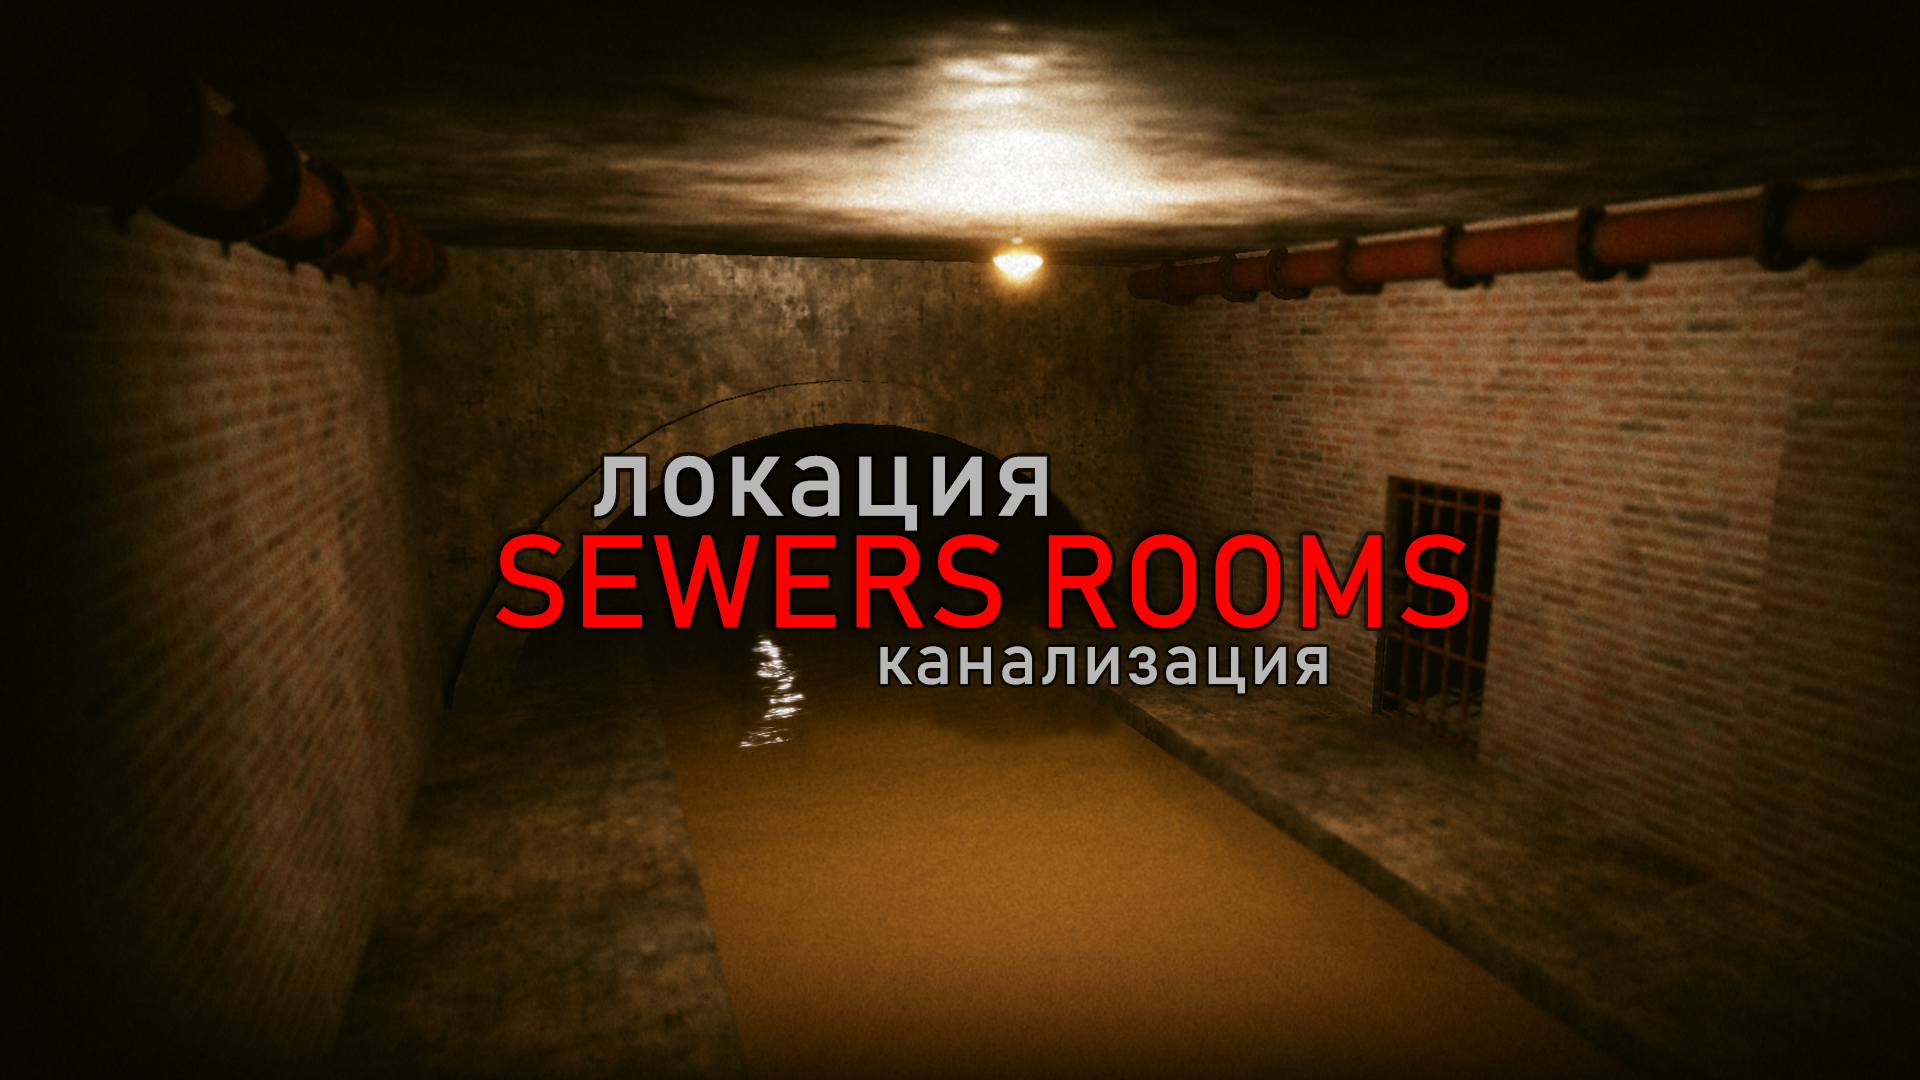 Sewers Rooms? I image 22